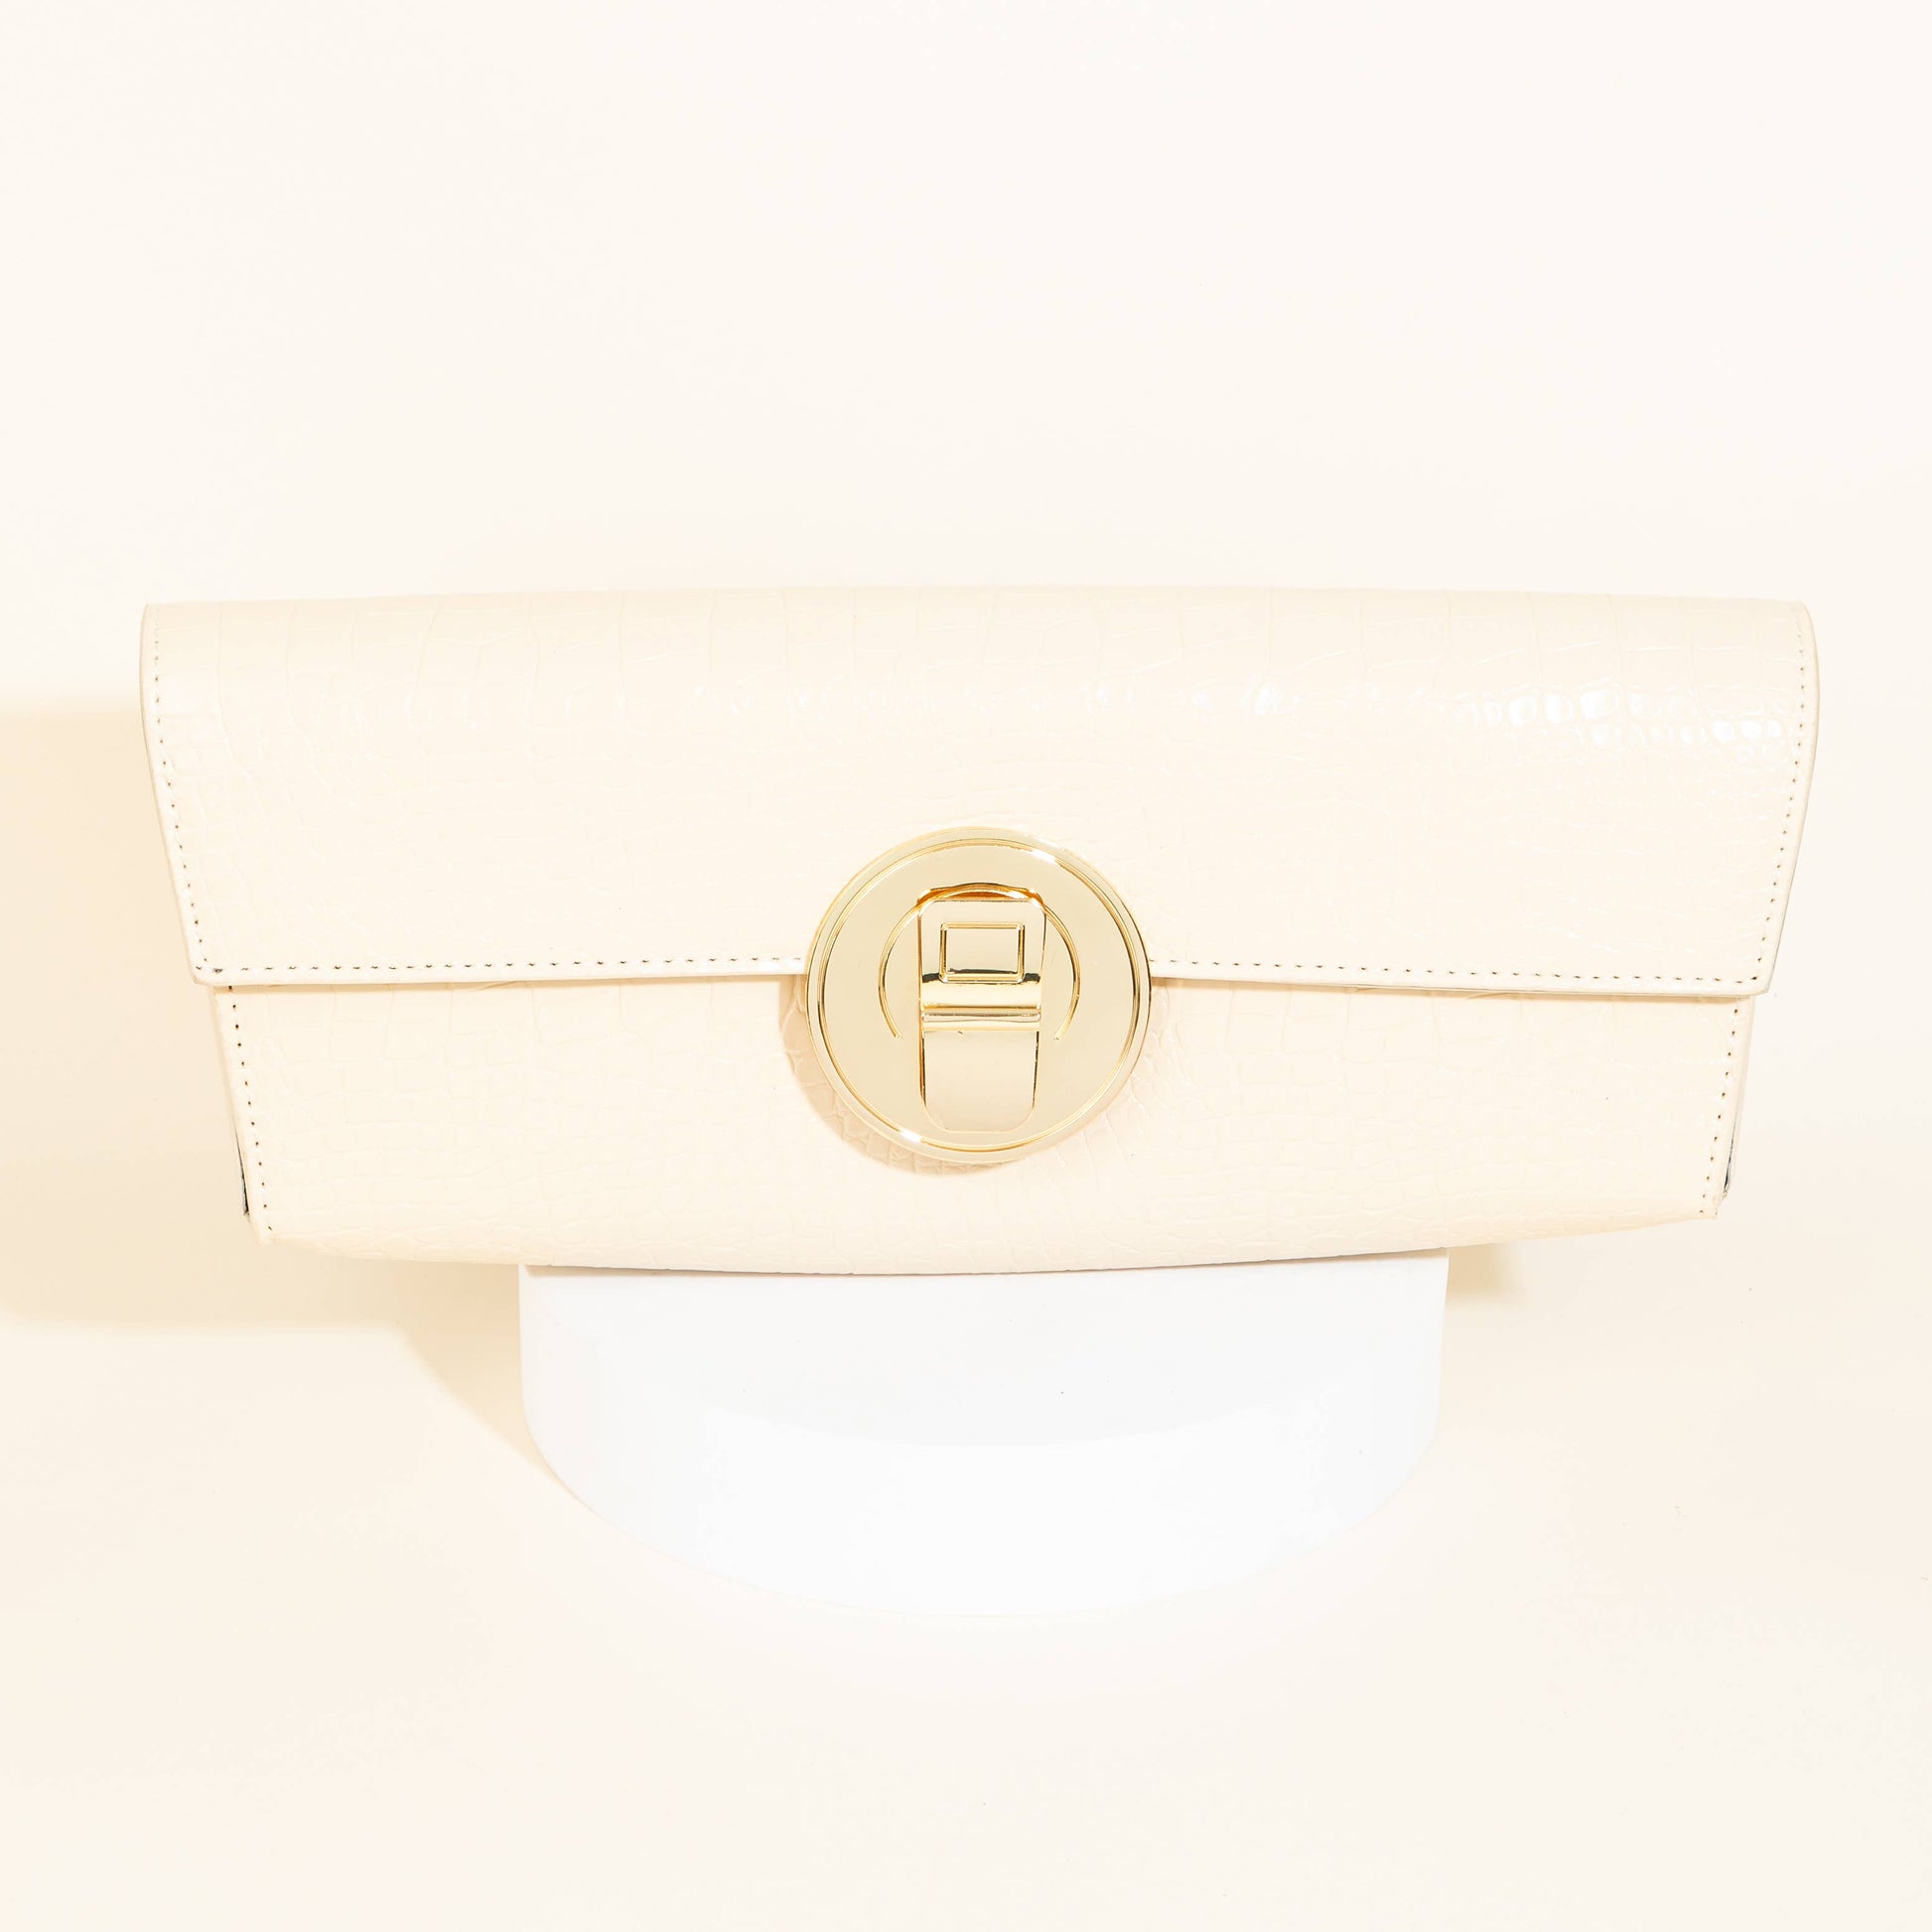 As an industry expert, the Boss Babe Clutch offers a stylish and functional accessory for any outfit. The sleek design of the clutch provides a professional touch while the compact size offers convenience. Perfect for any modern businesswoman, this clutch is a must-have for staying organized and on-trend.